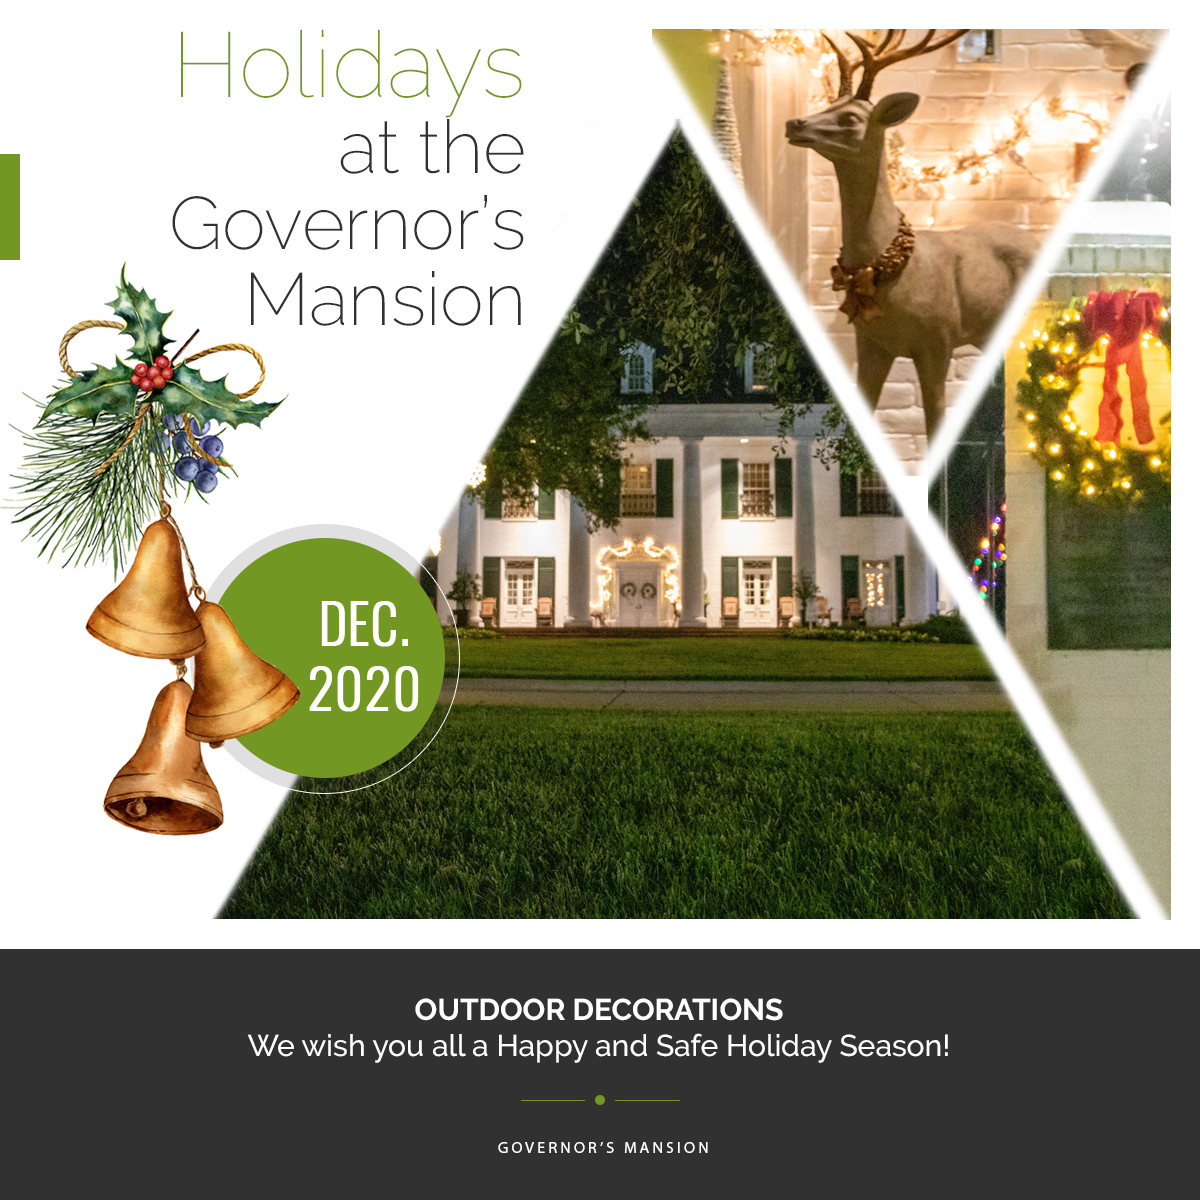 Holidays at the Governor’s Mansion